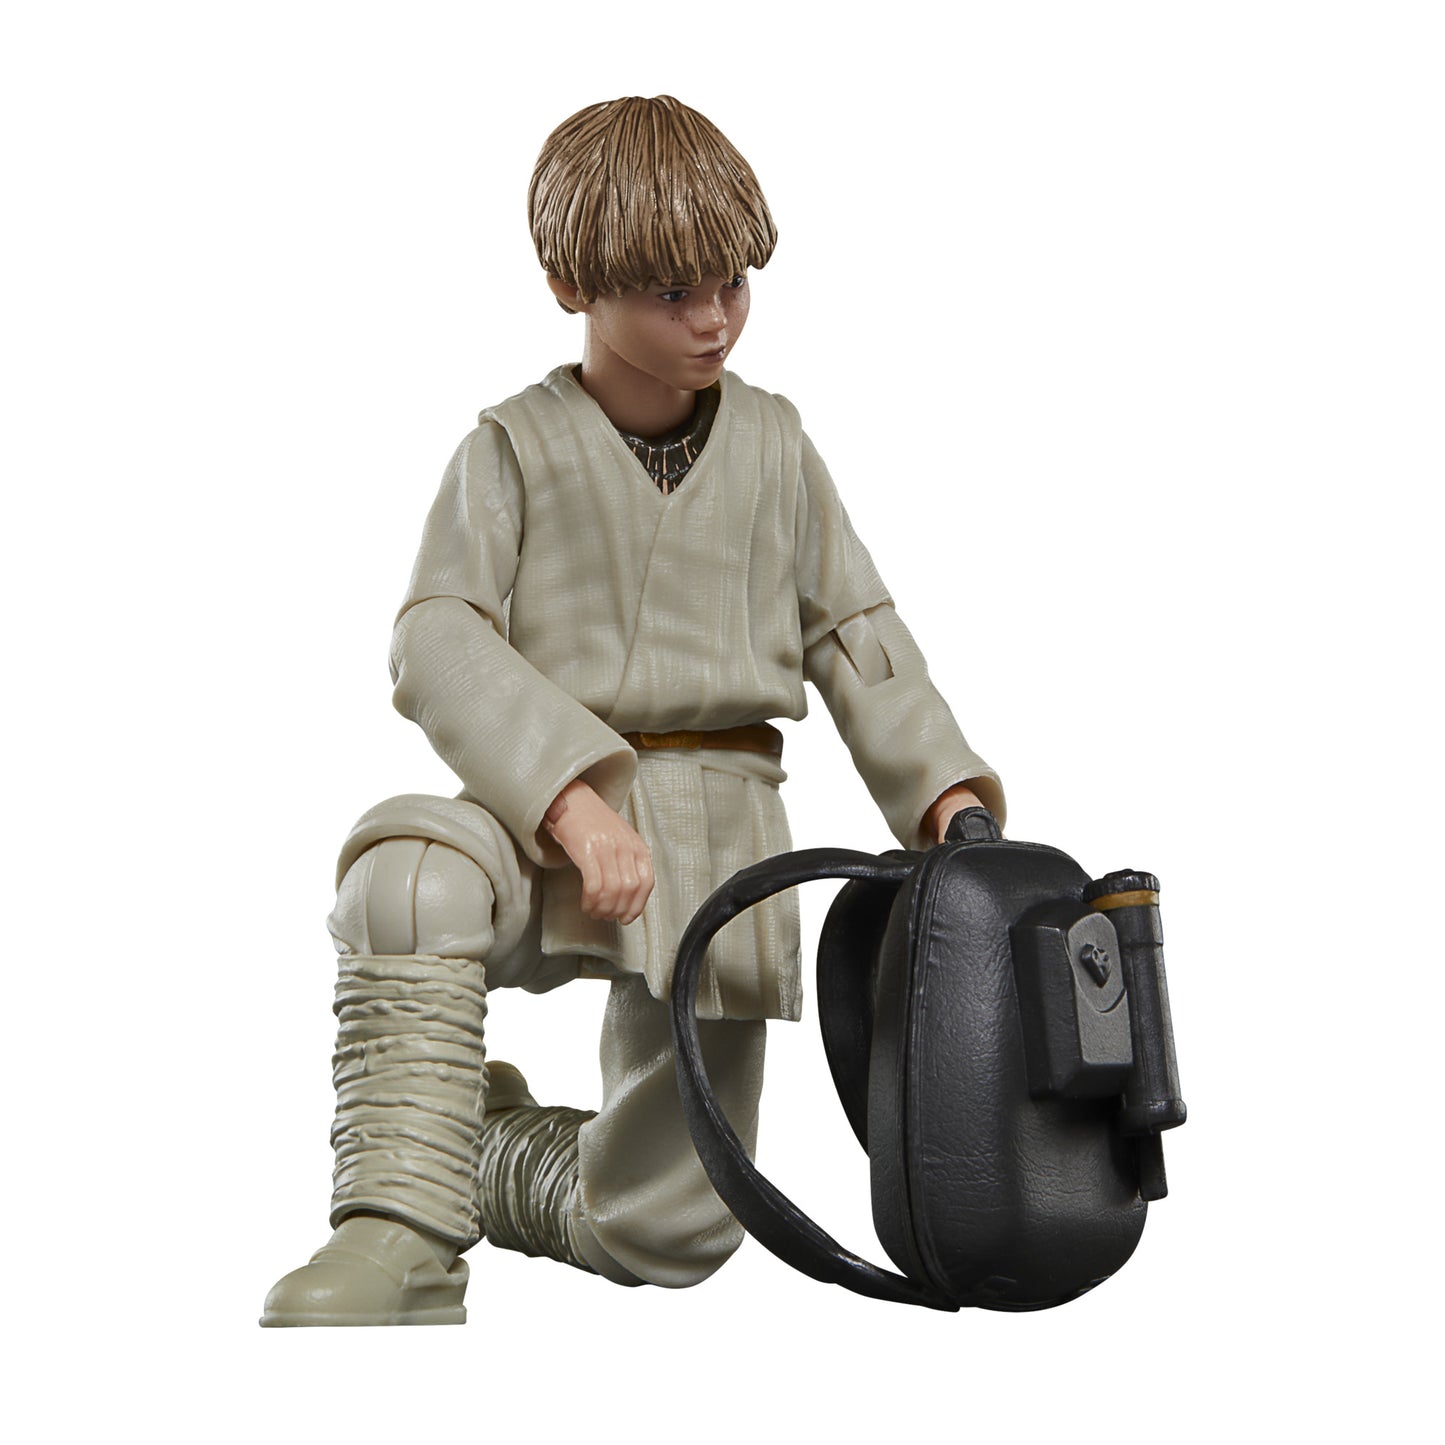 [PRE-ORDER] Star Wars The Black Series Anakin Skywalker, Star Wars: The Phantom Menace Collectible 6 Inch Action Figure, Ages 4 and Up